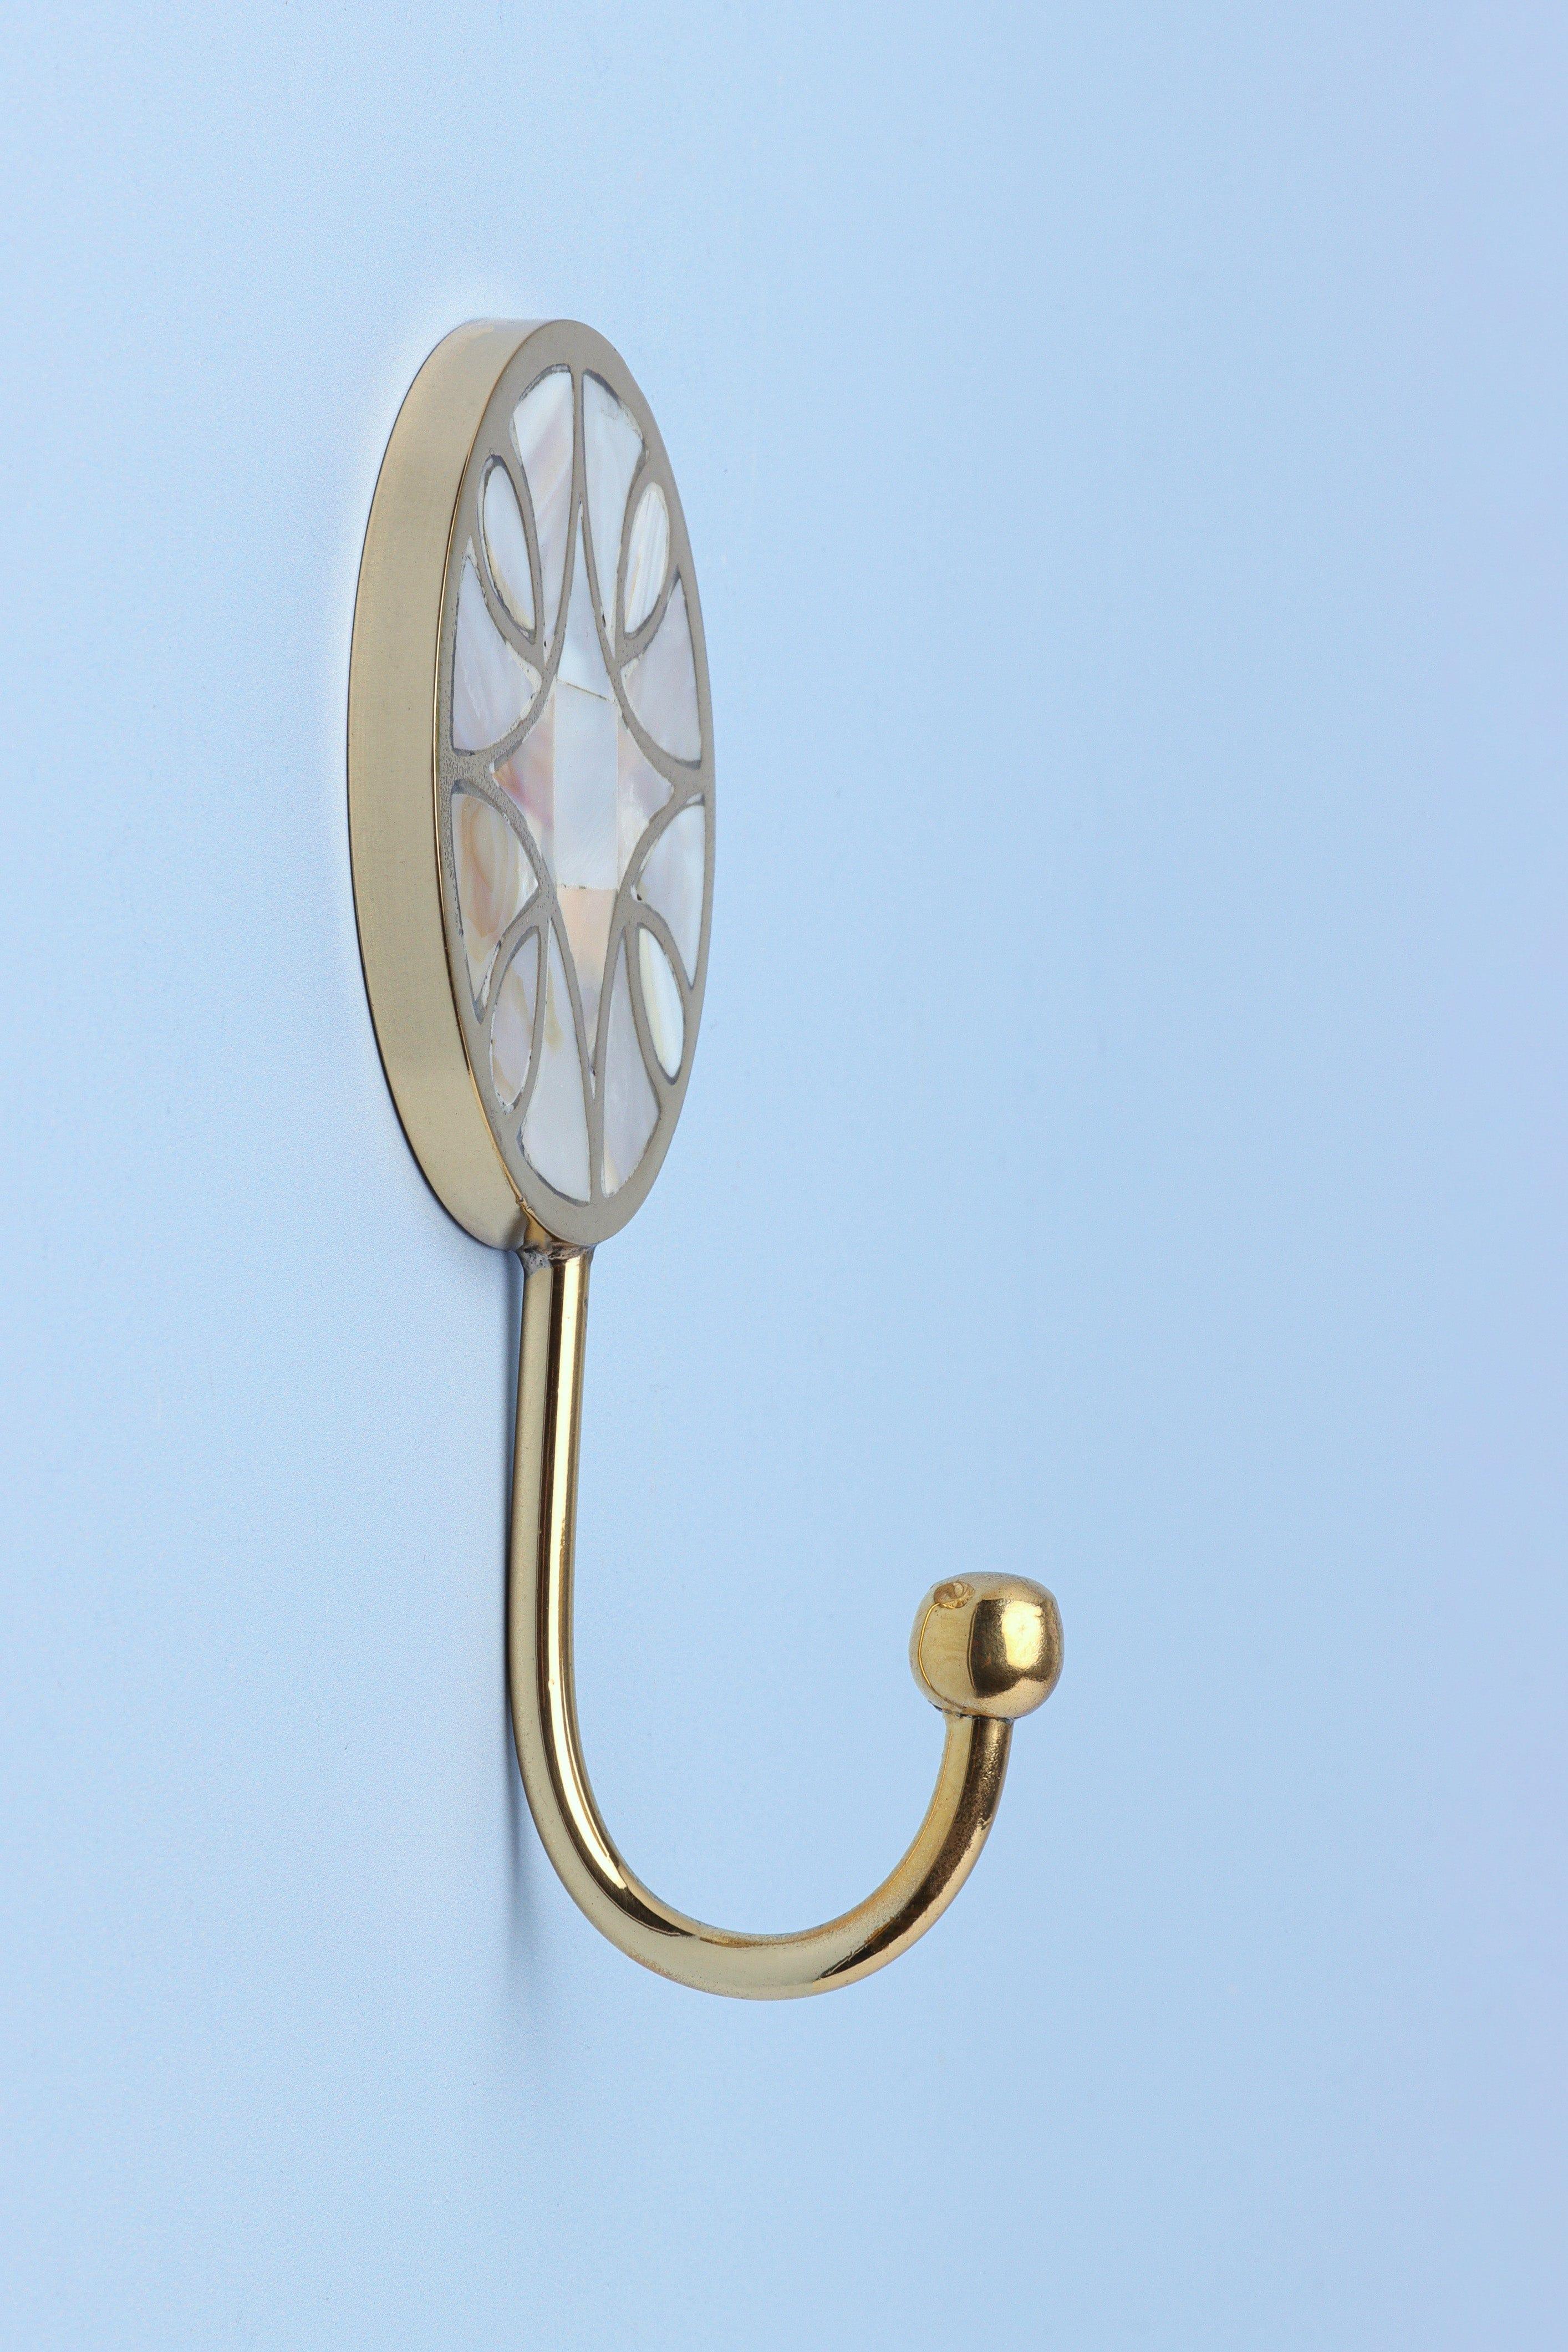 Gold Mother Of Pearl Patterned Brass Coat Hooks – G Decor